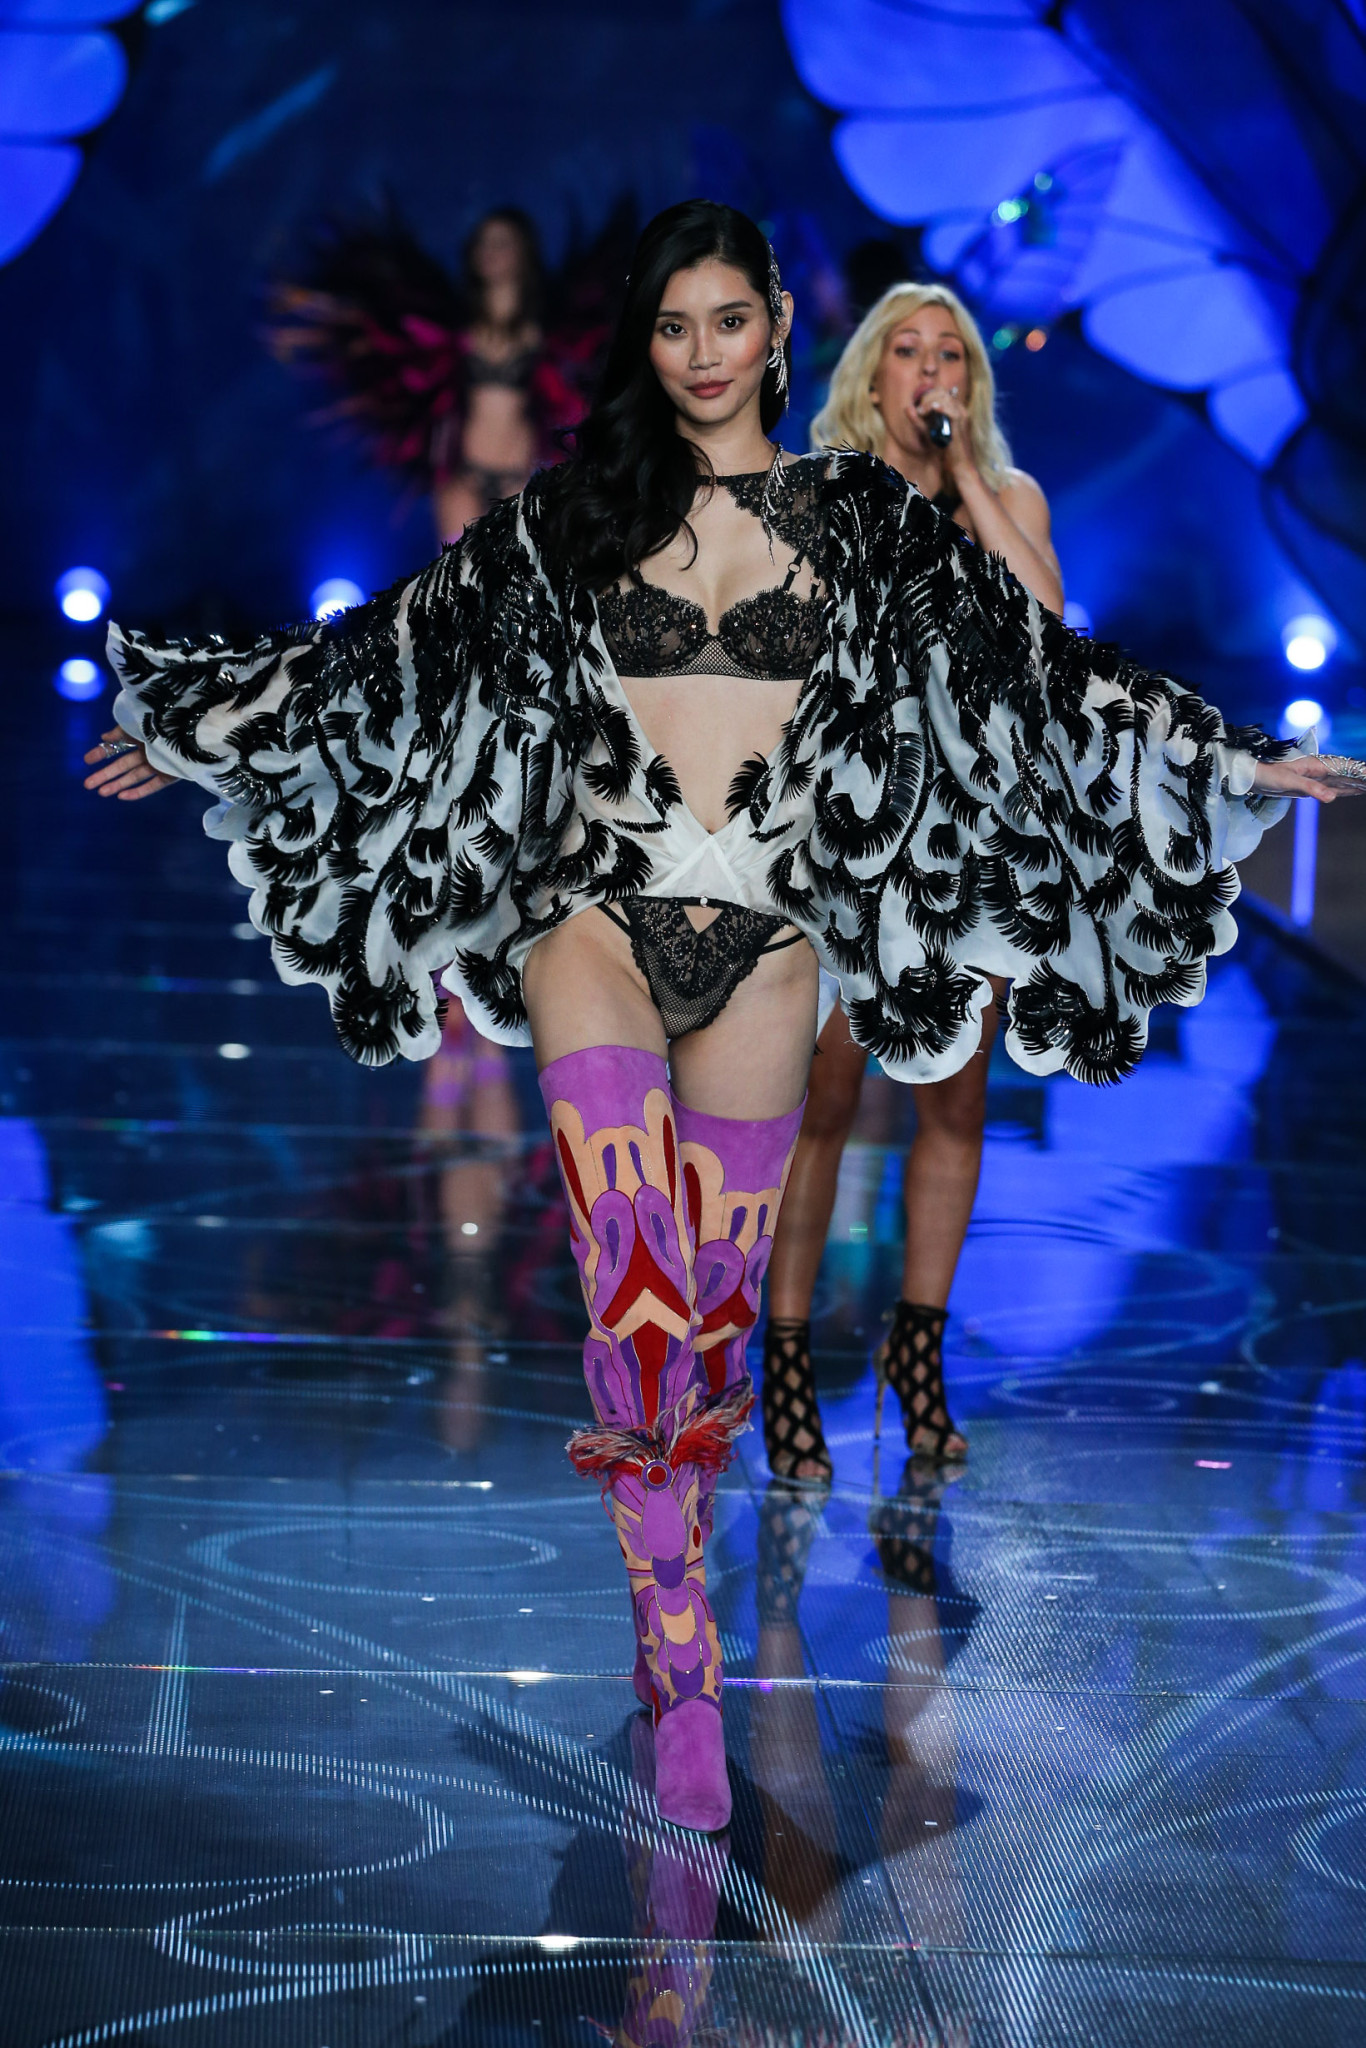 Model Ming Xi walks the runway at the 2015 Victoria's Secret Fashion Show in New York City on November 10th, 2015